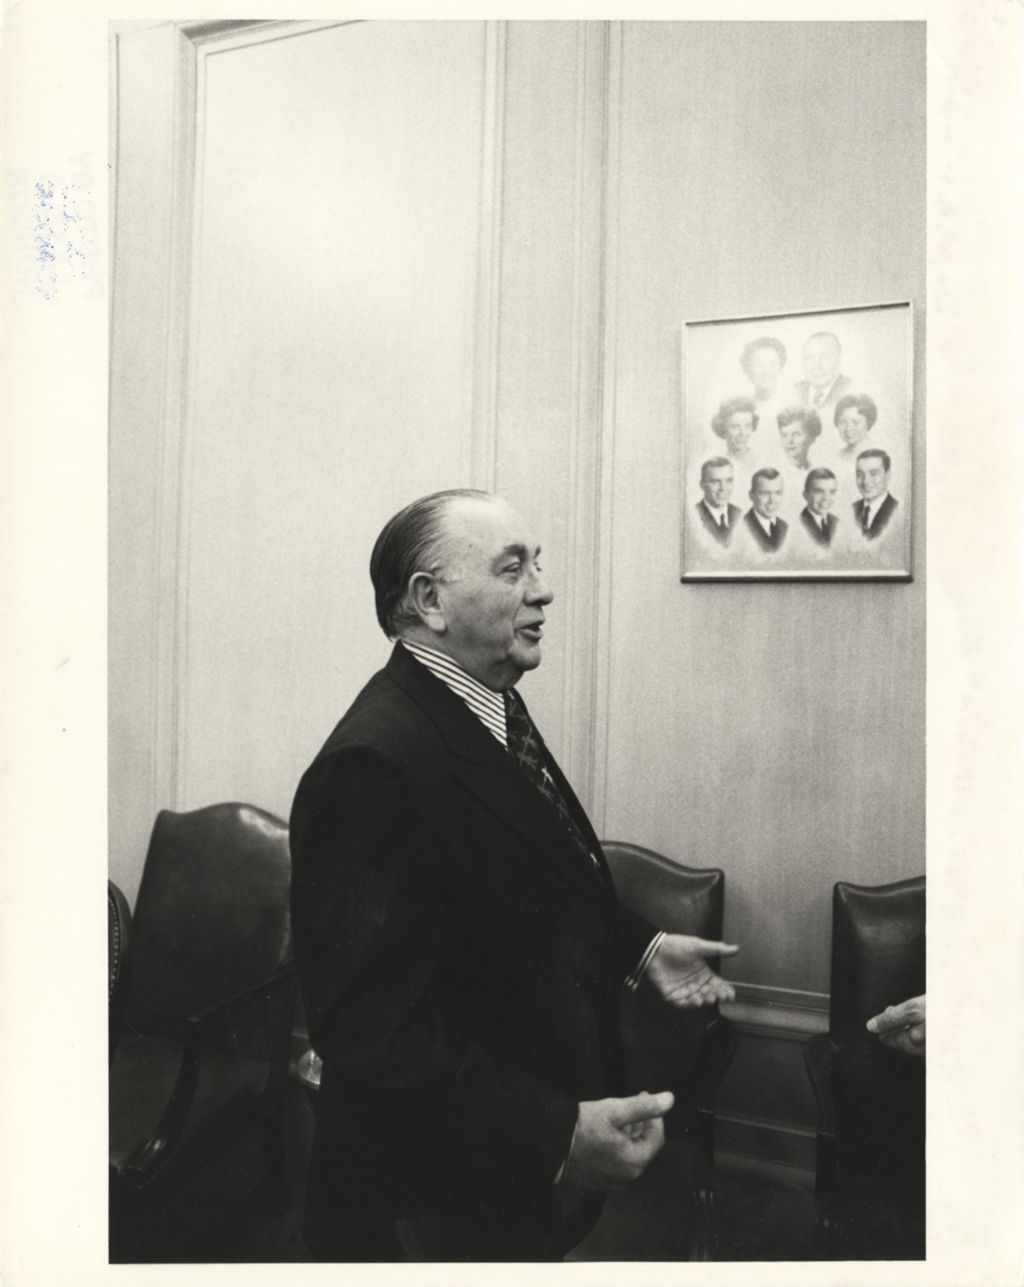 Miniature of Richard J. Daley in his office